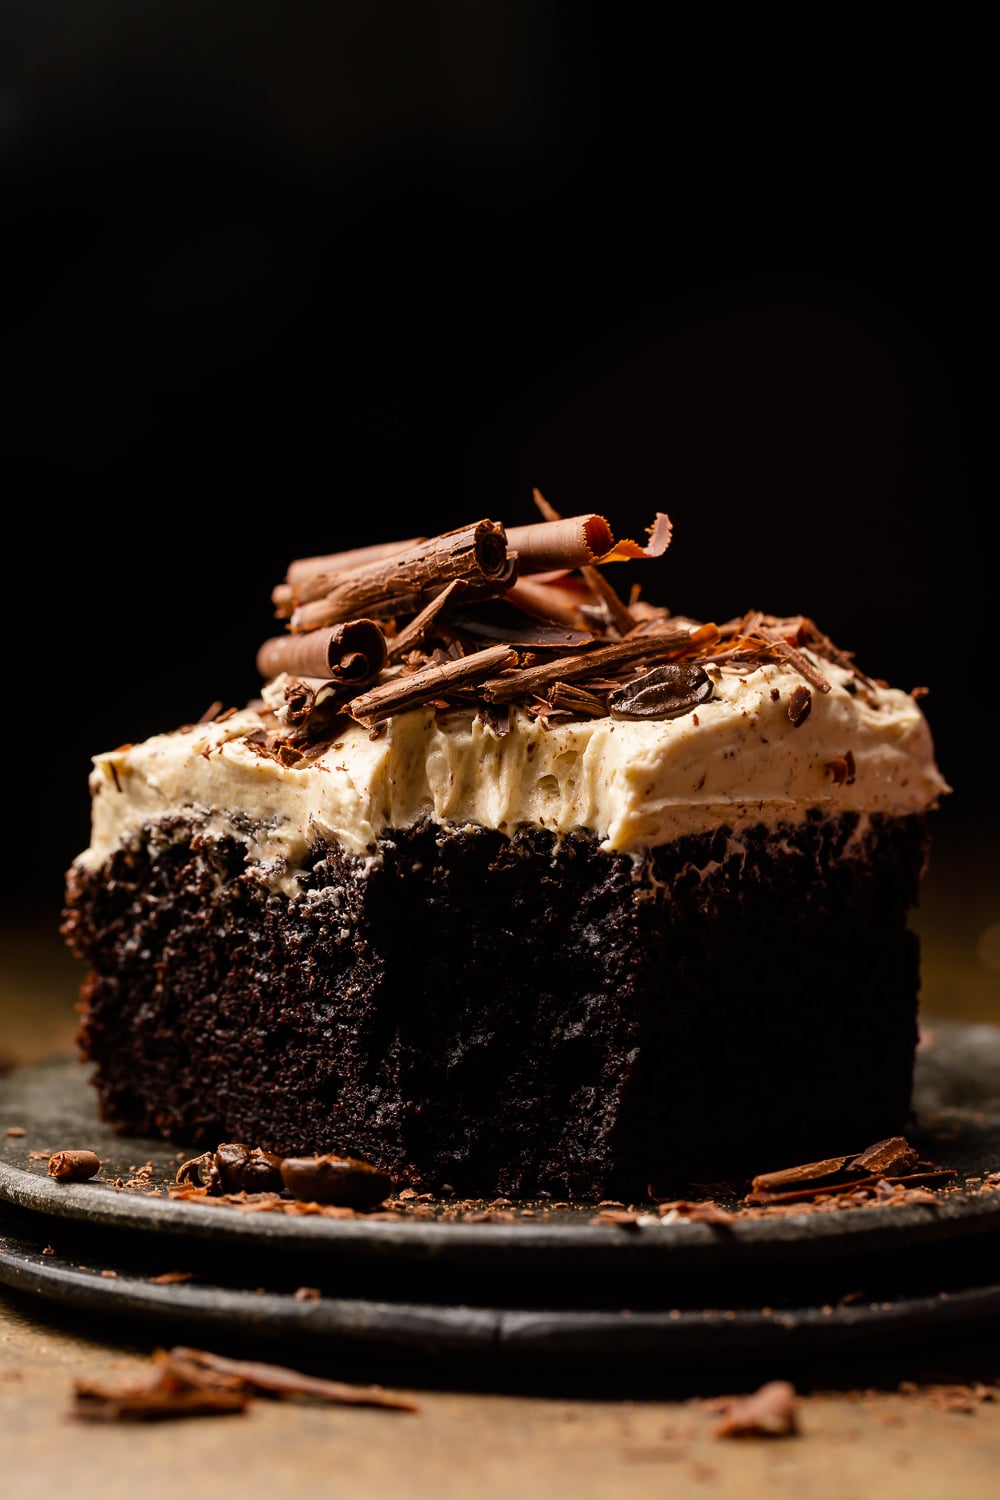 Chocolate Cake with Mocha Buttercream Frosting